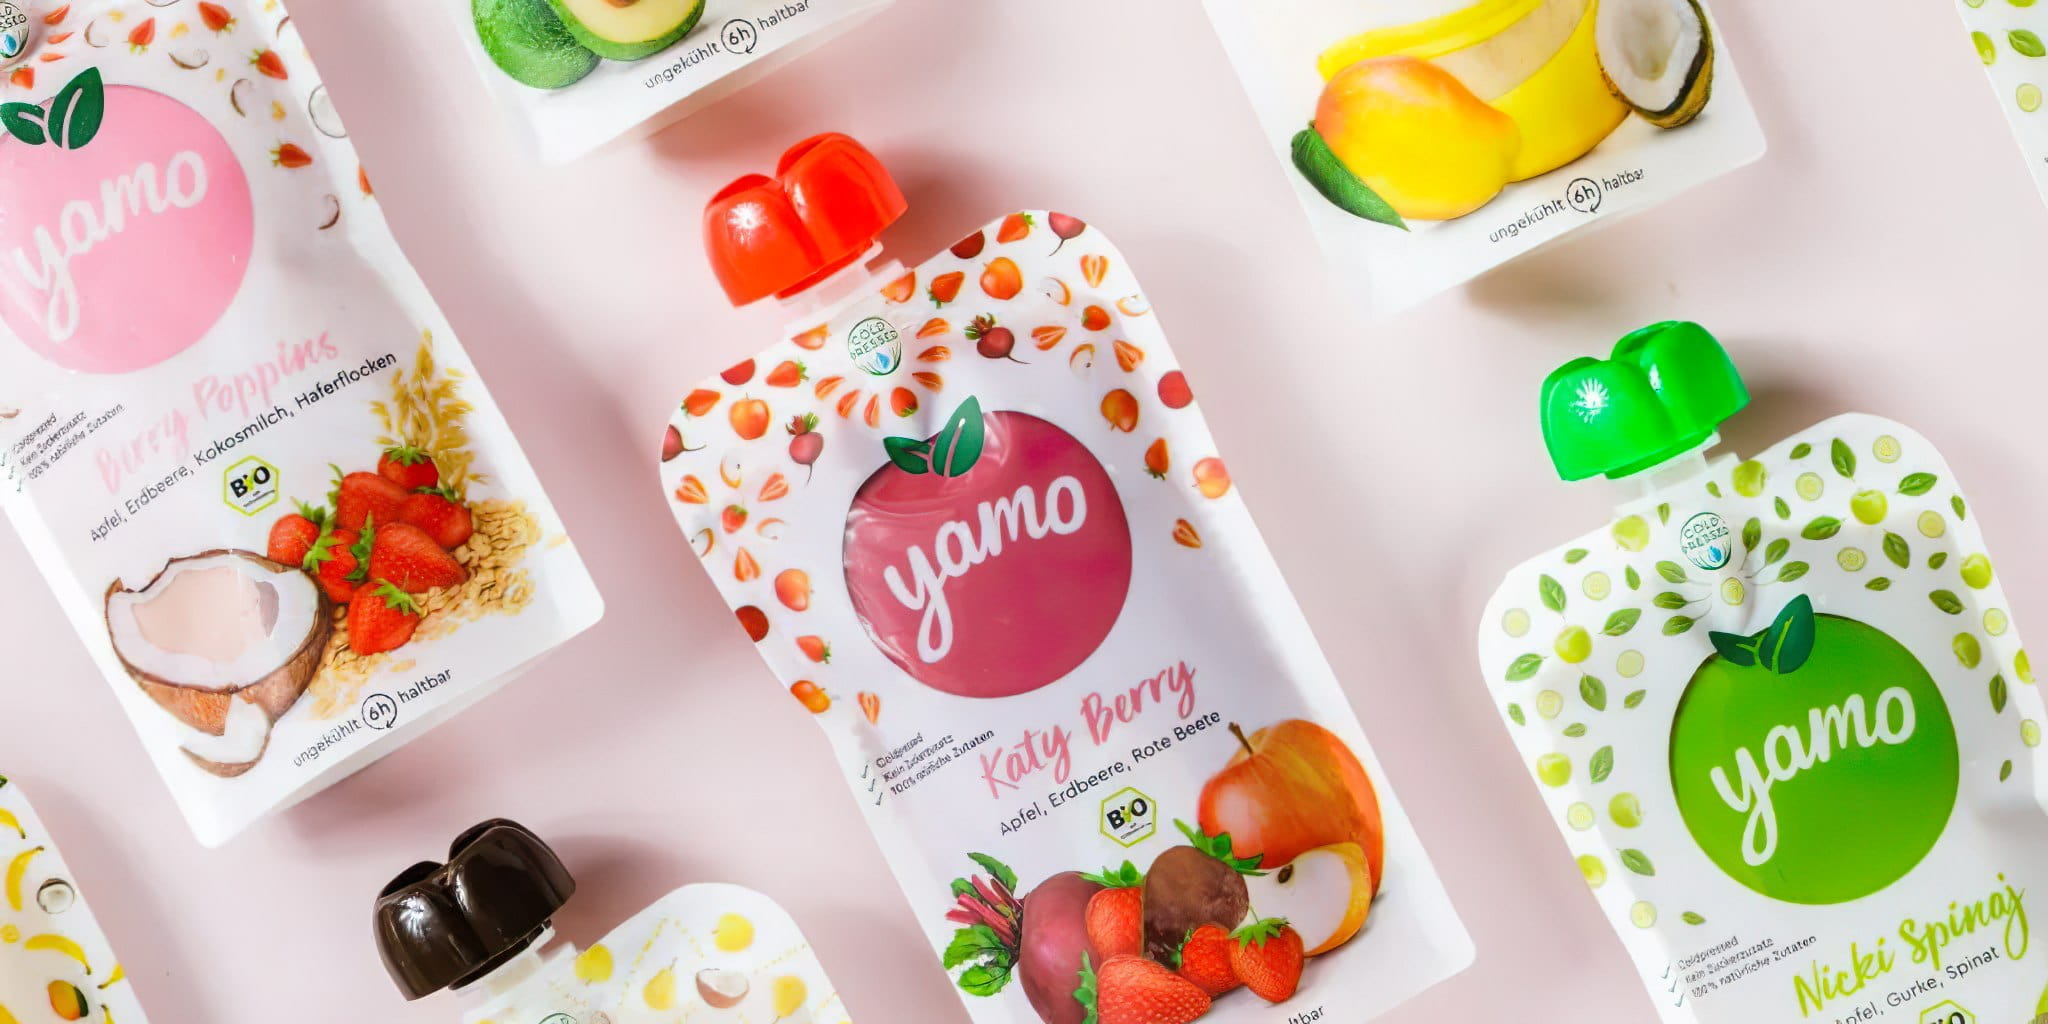 Yamo - 100% organic, plant-based, and sugar-free baby nutrition products